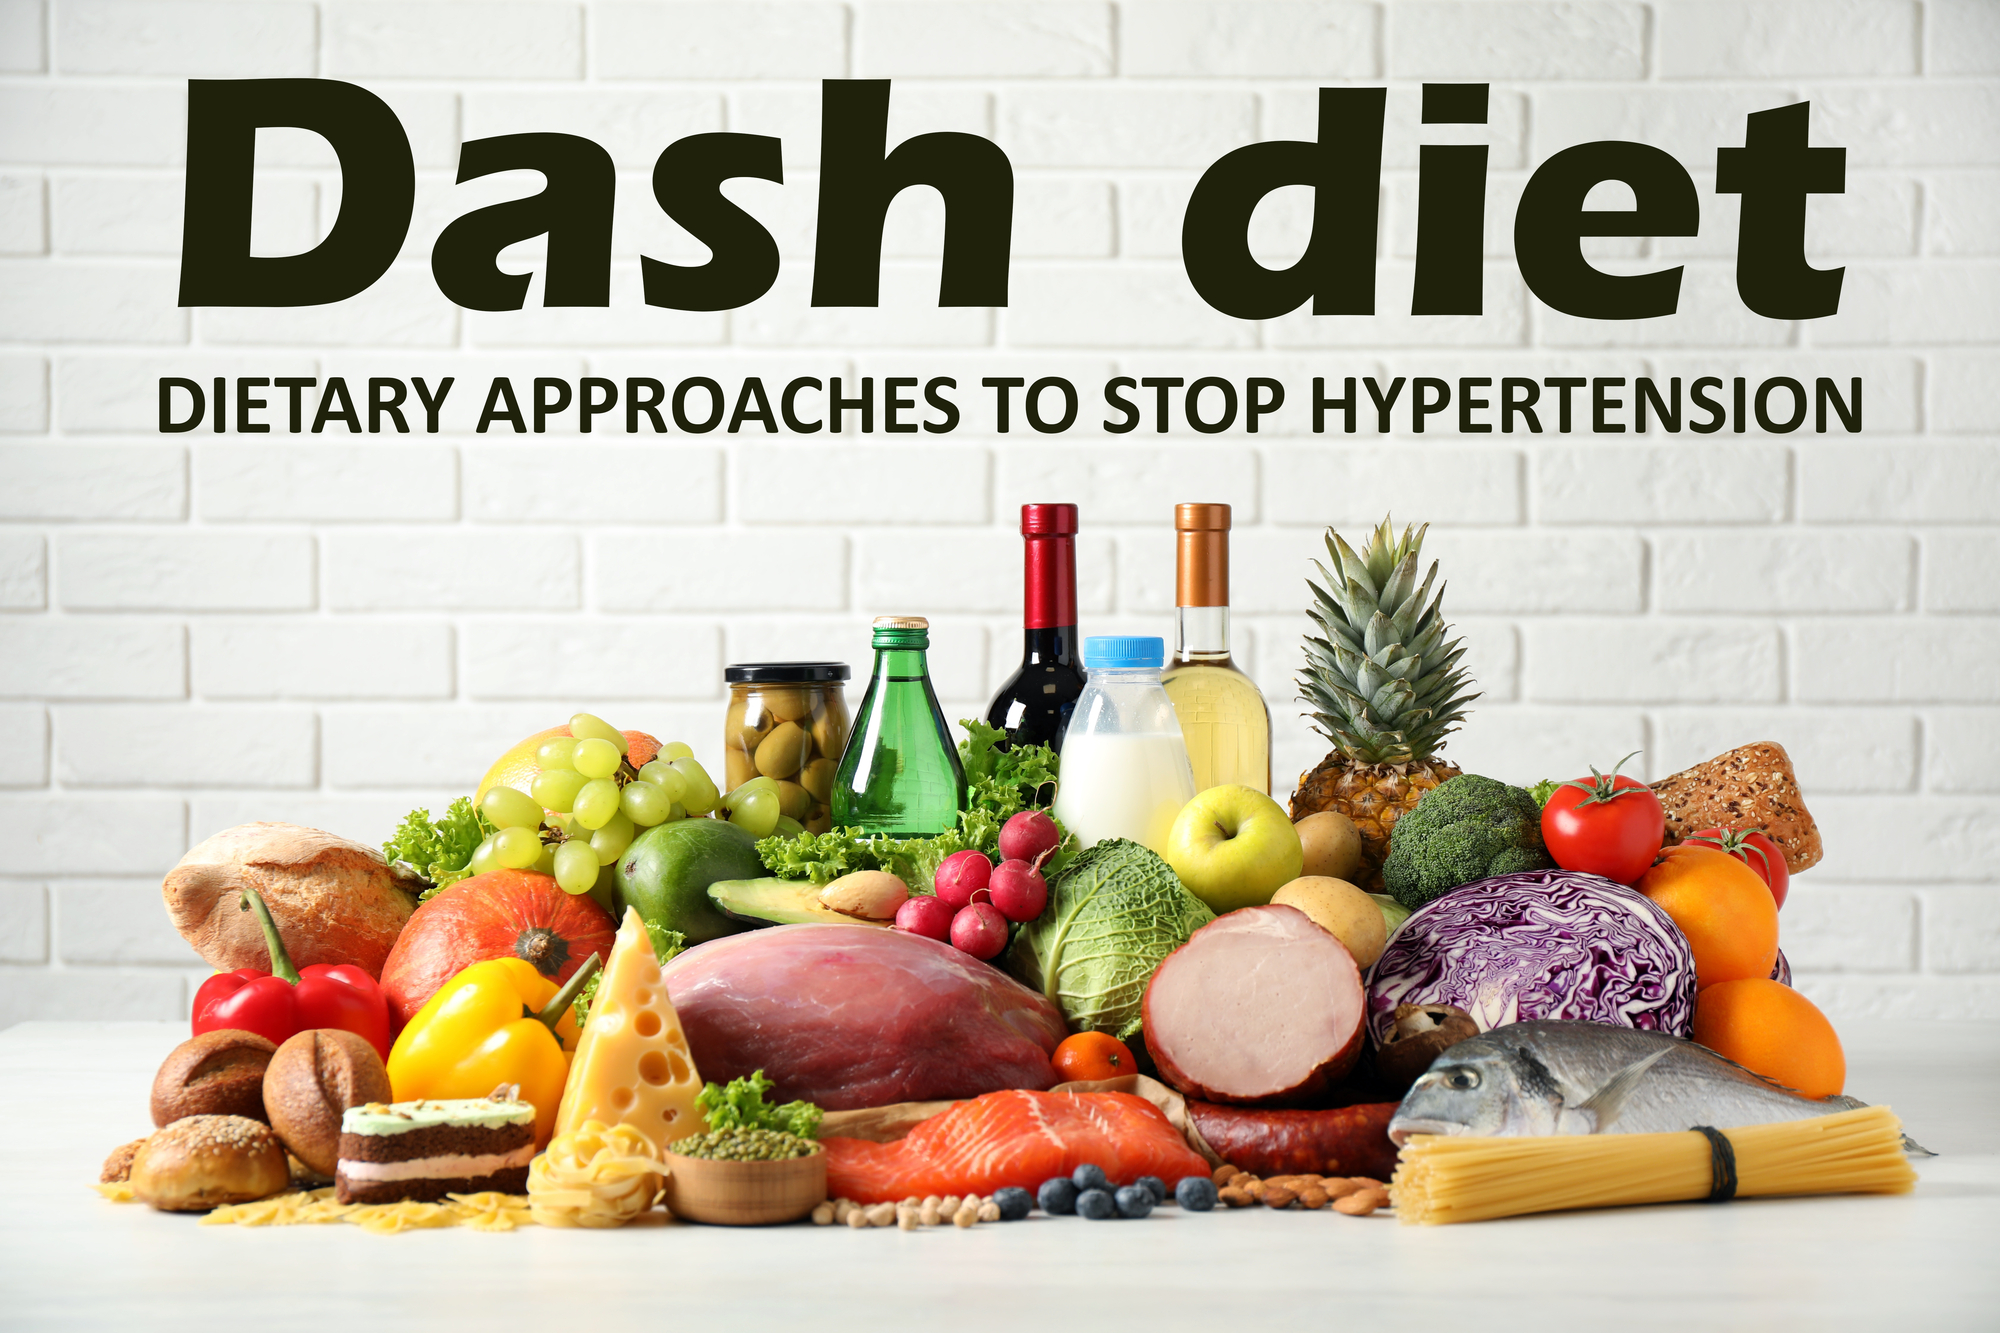 Dash diet (Dietary approaches to stop hypertension). Many different healthy food and drinks on white table